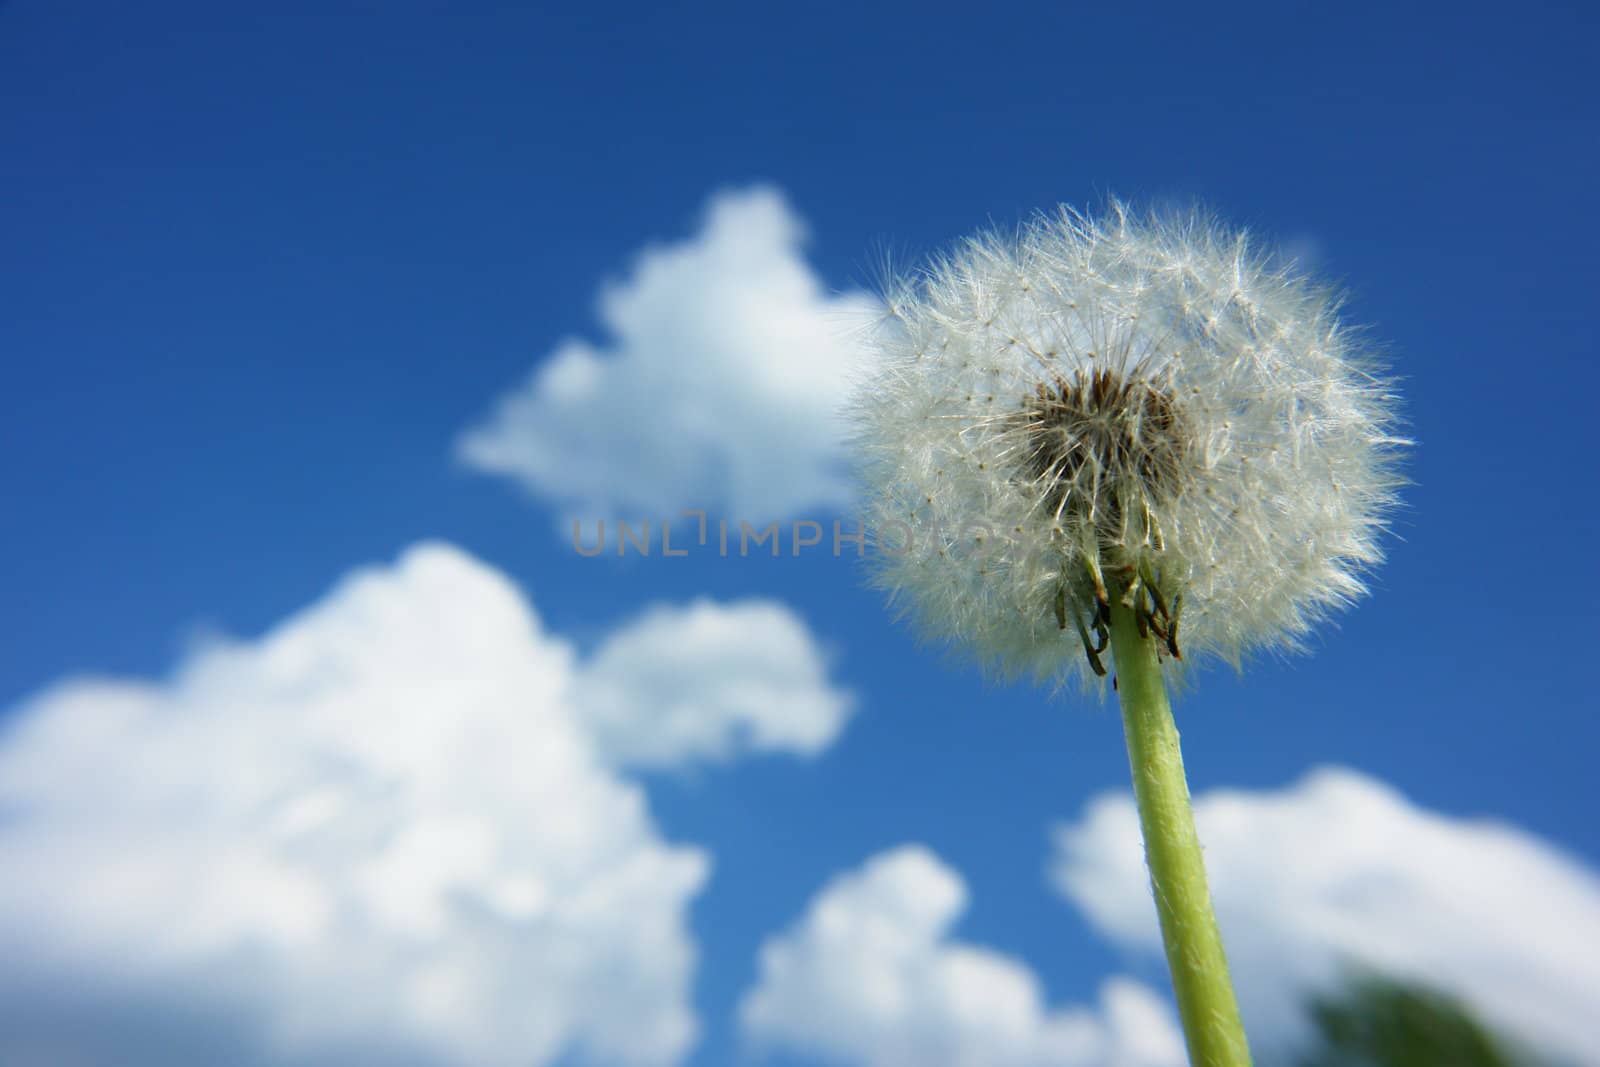 blowball dandelion clock at springtime in the wind